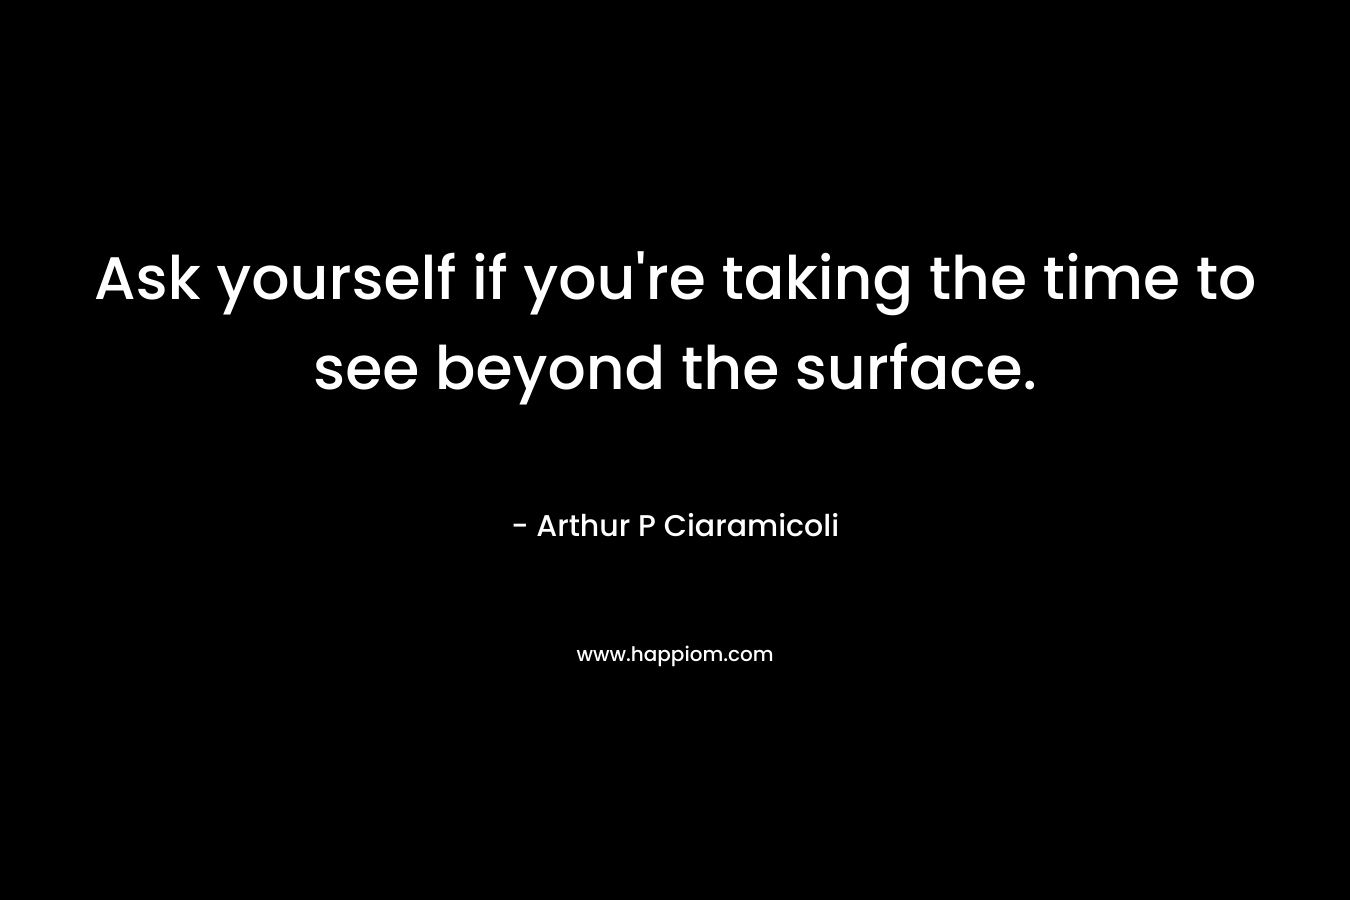 Ask yourself if you’re taking the time to see beyond the surface. – Arthur P Ciaramicoli